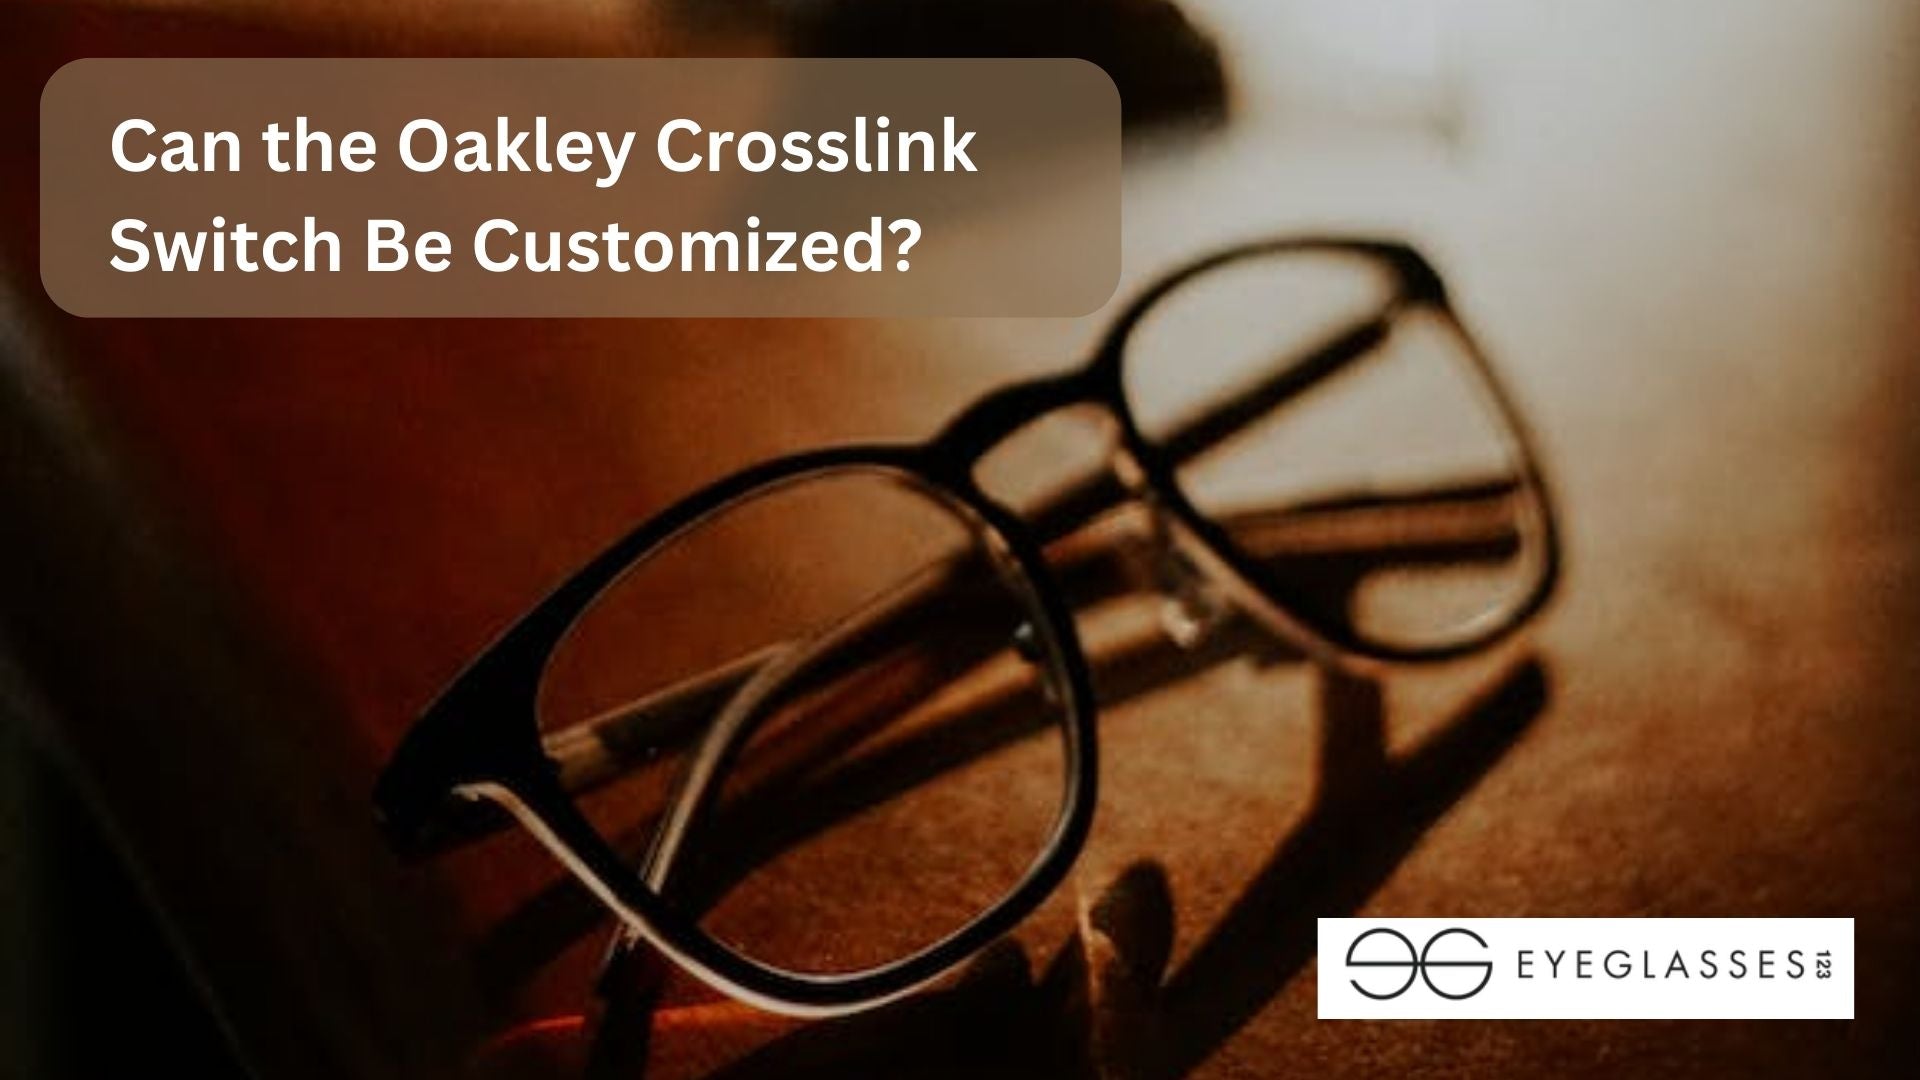 Can the Oakley Crosslink Switch Be Customized